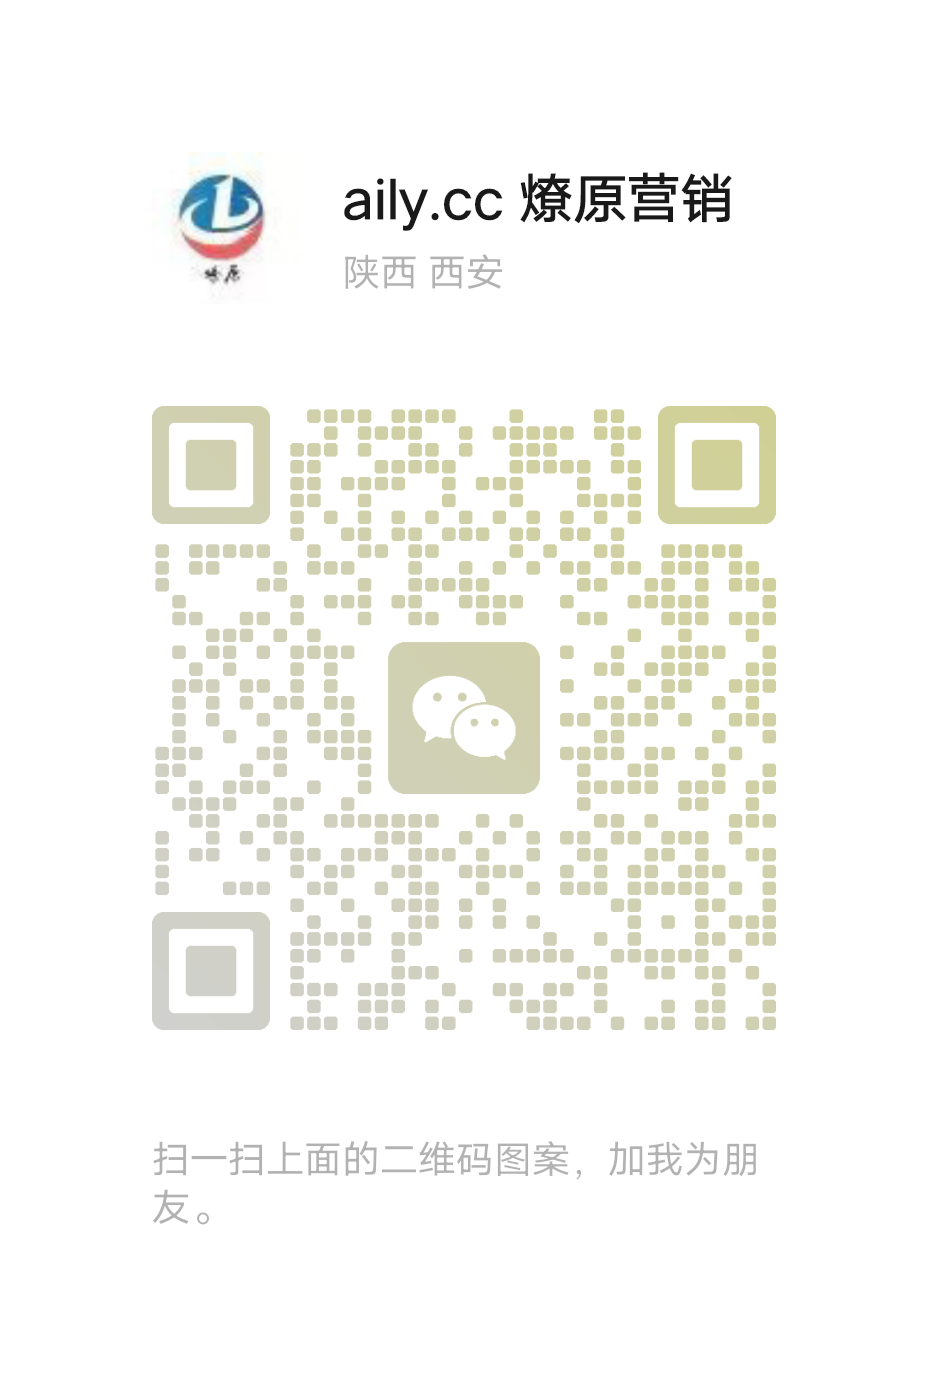 mmqrcode1711176950450.png